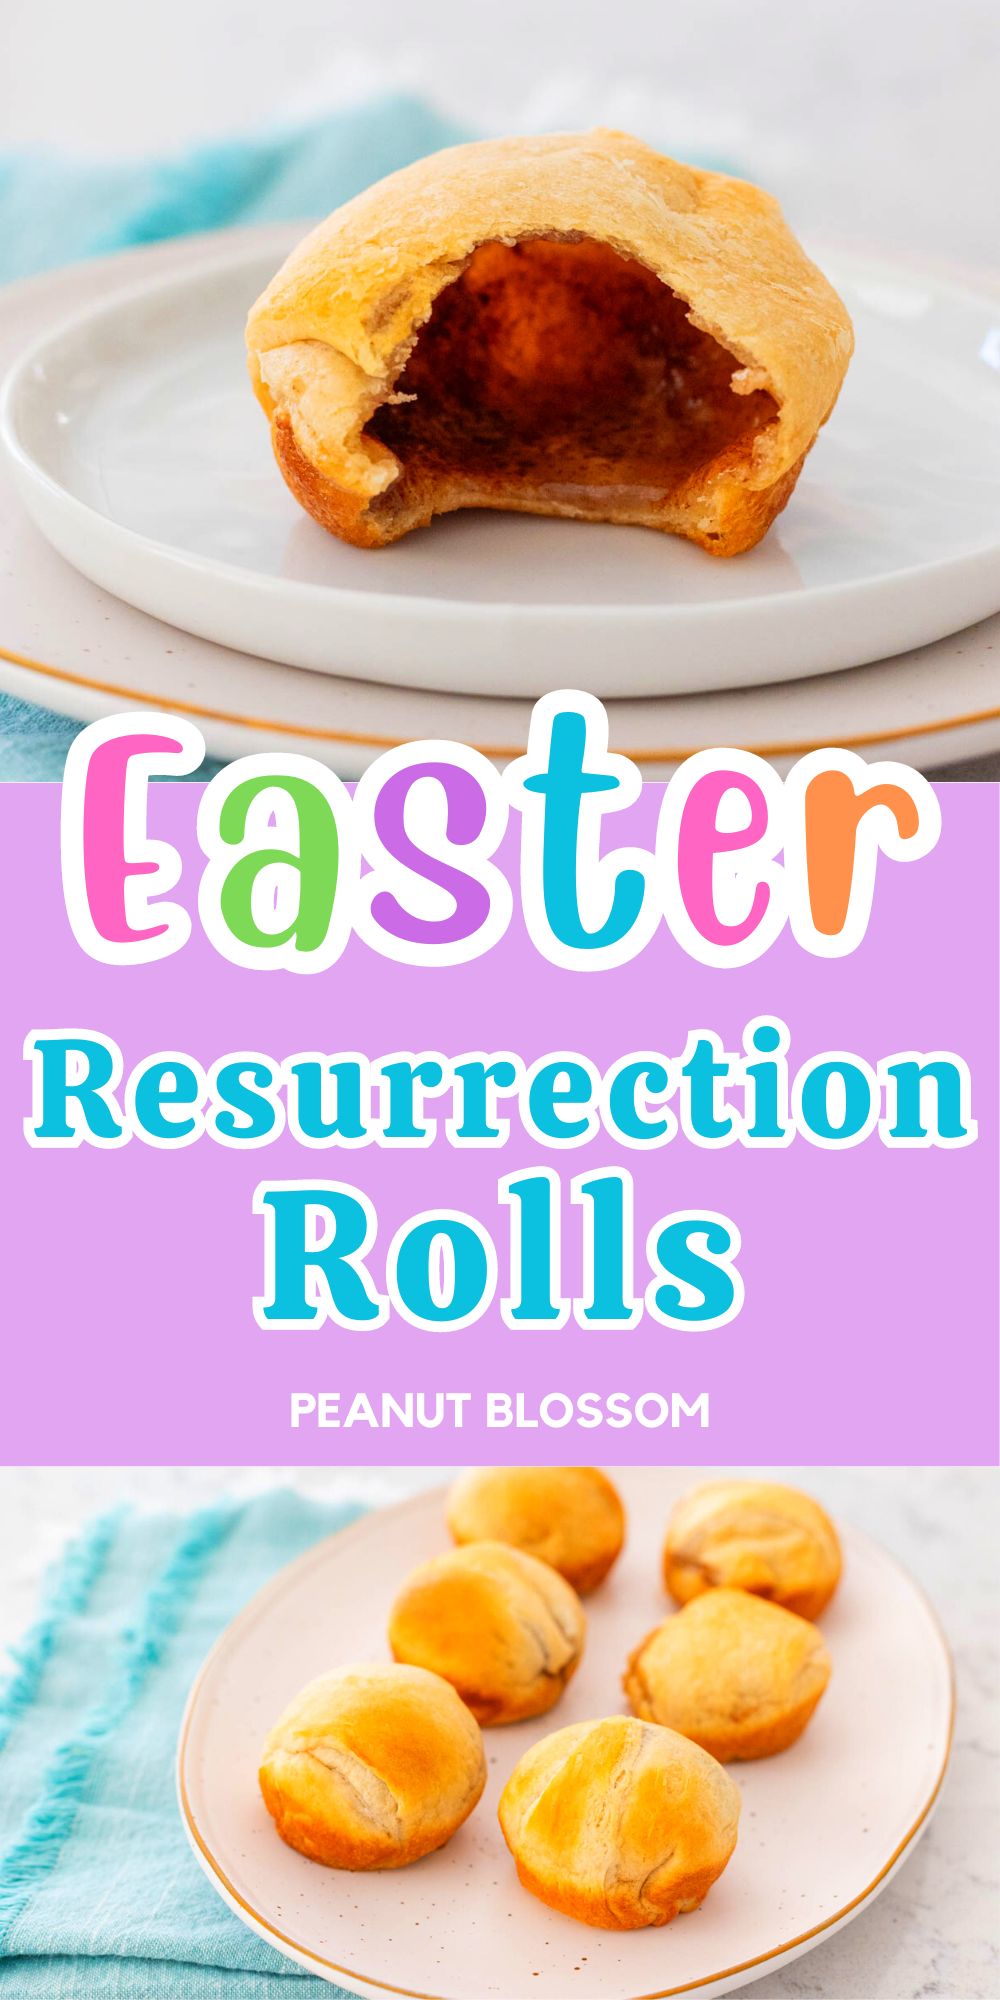 A photo collage shows one roll with a bite out to show it is empty next to a platter of resurrection rolls.